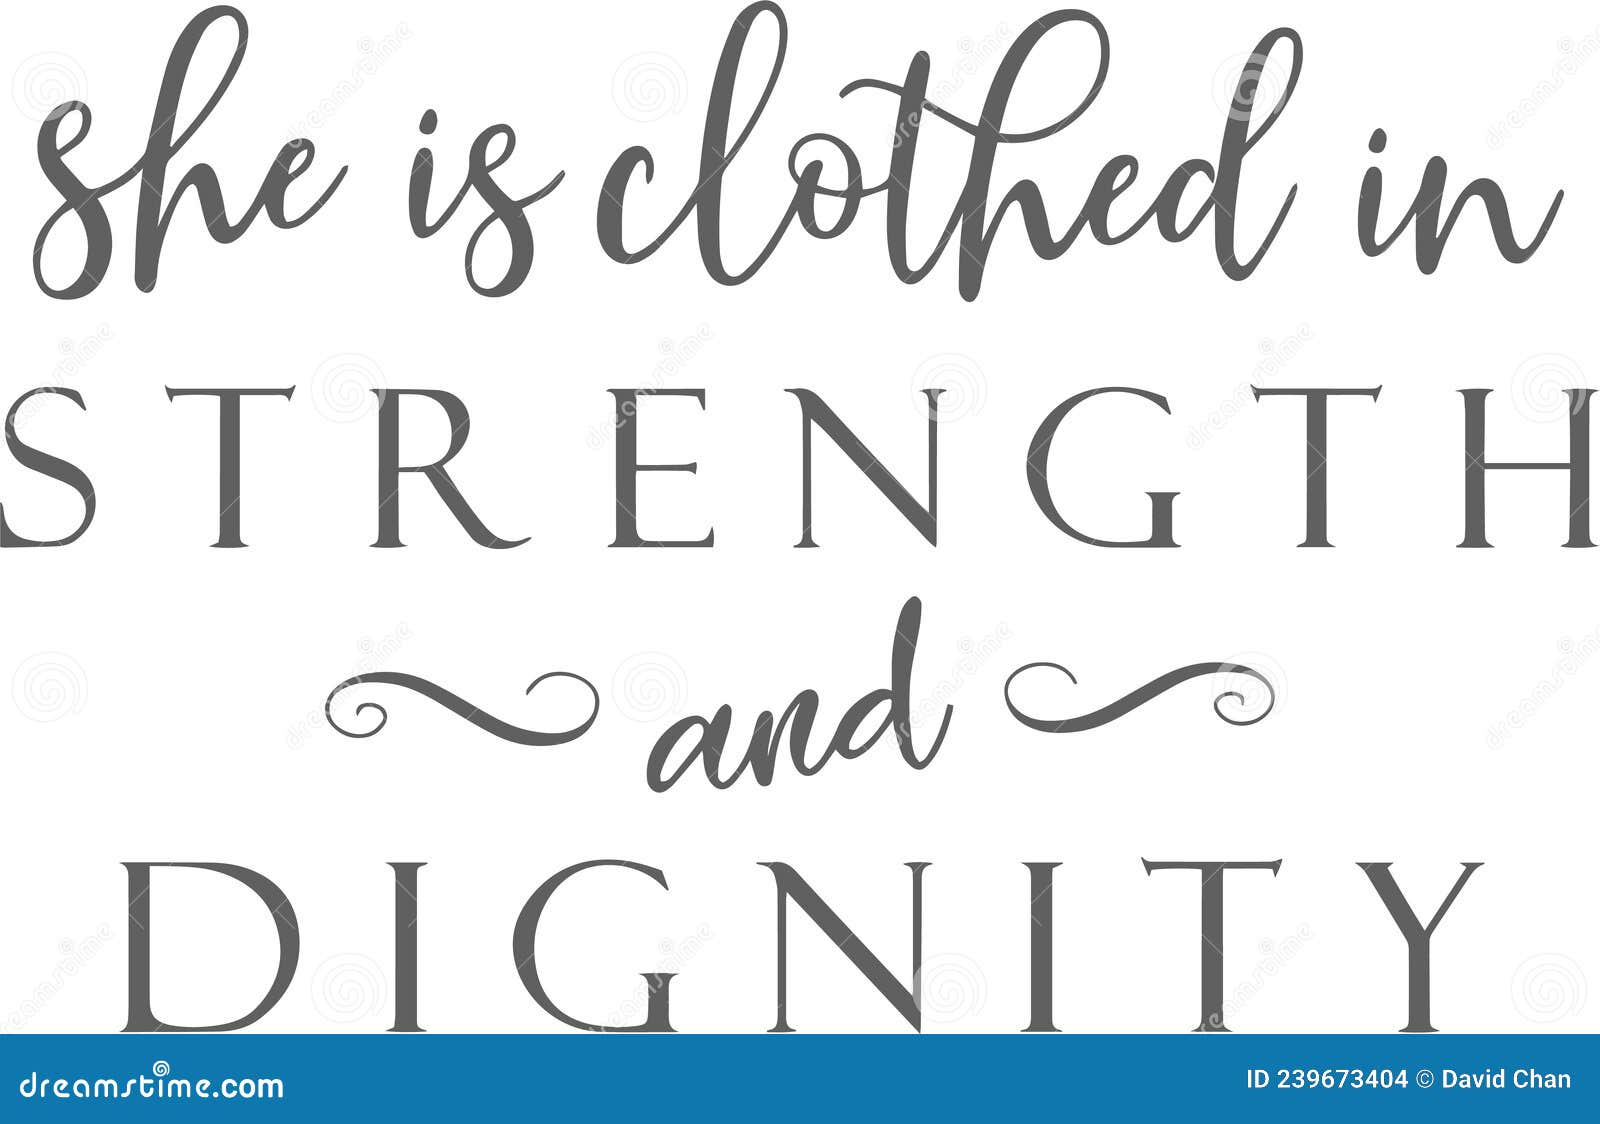 5. "She is clothed in strength and dignity" - wide 8